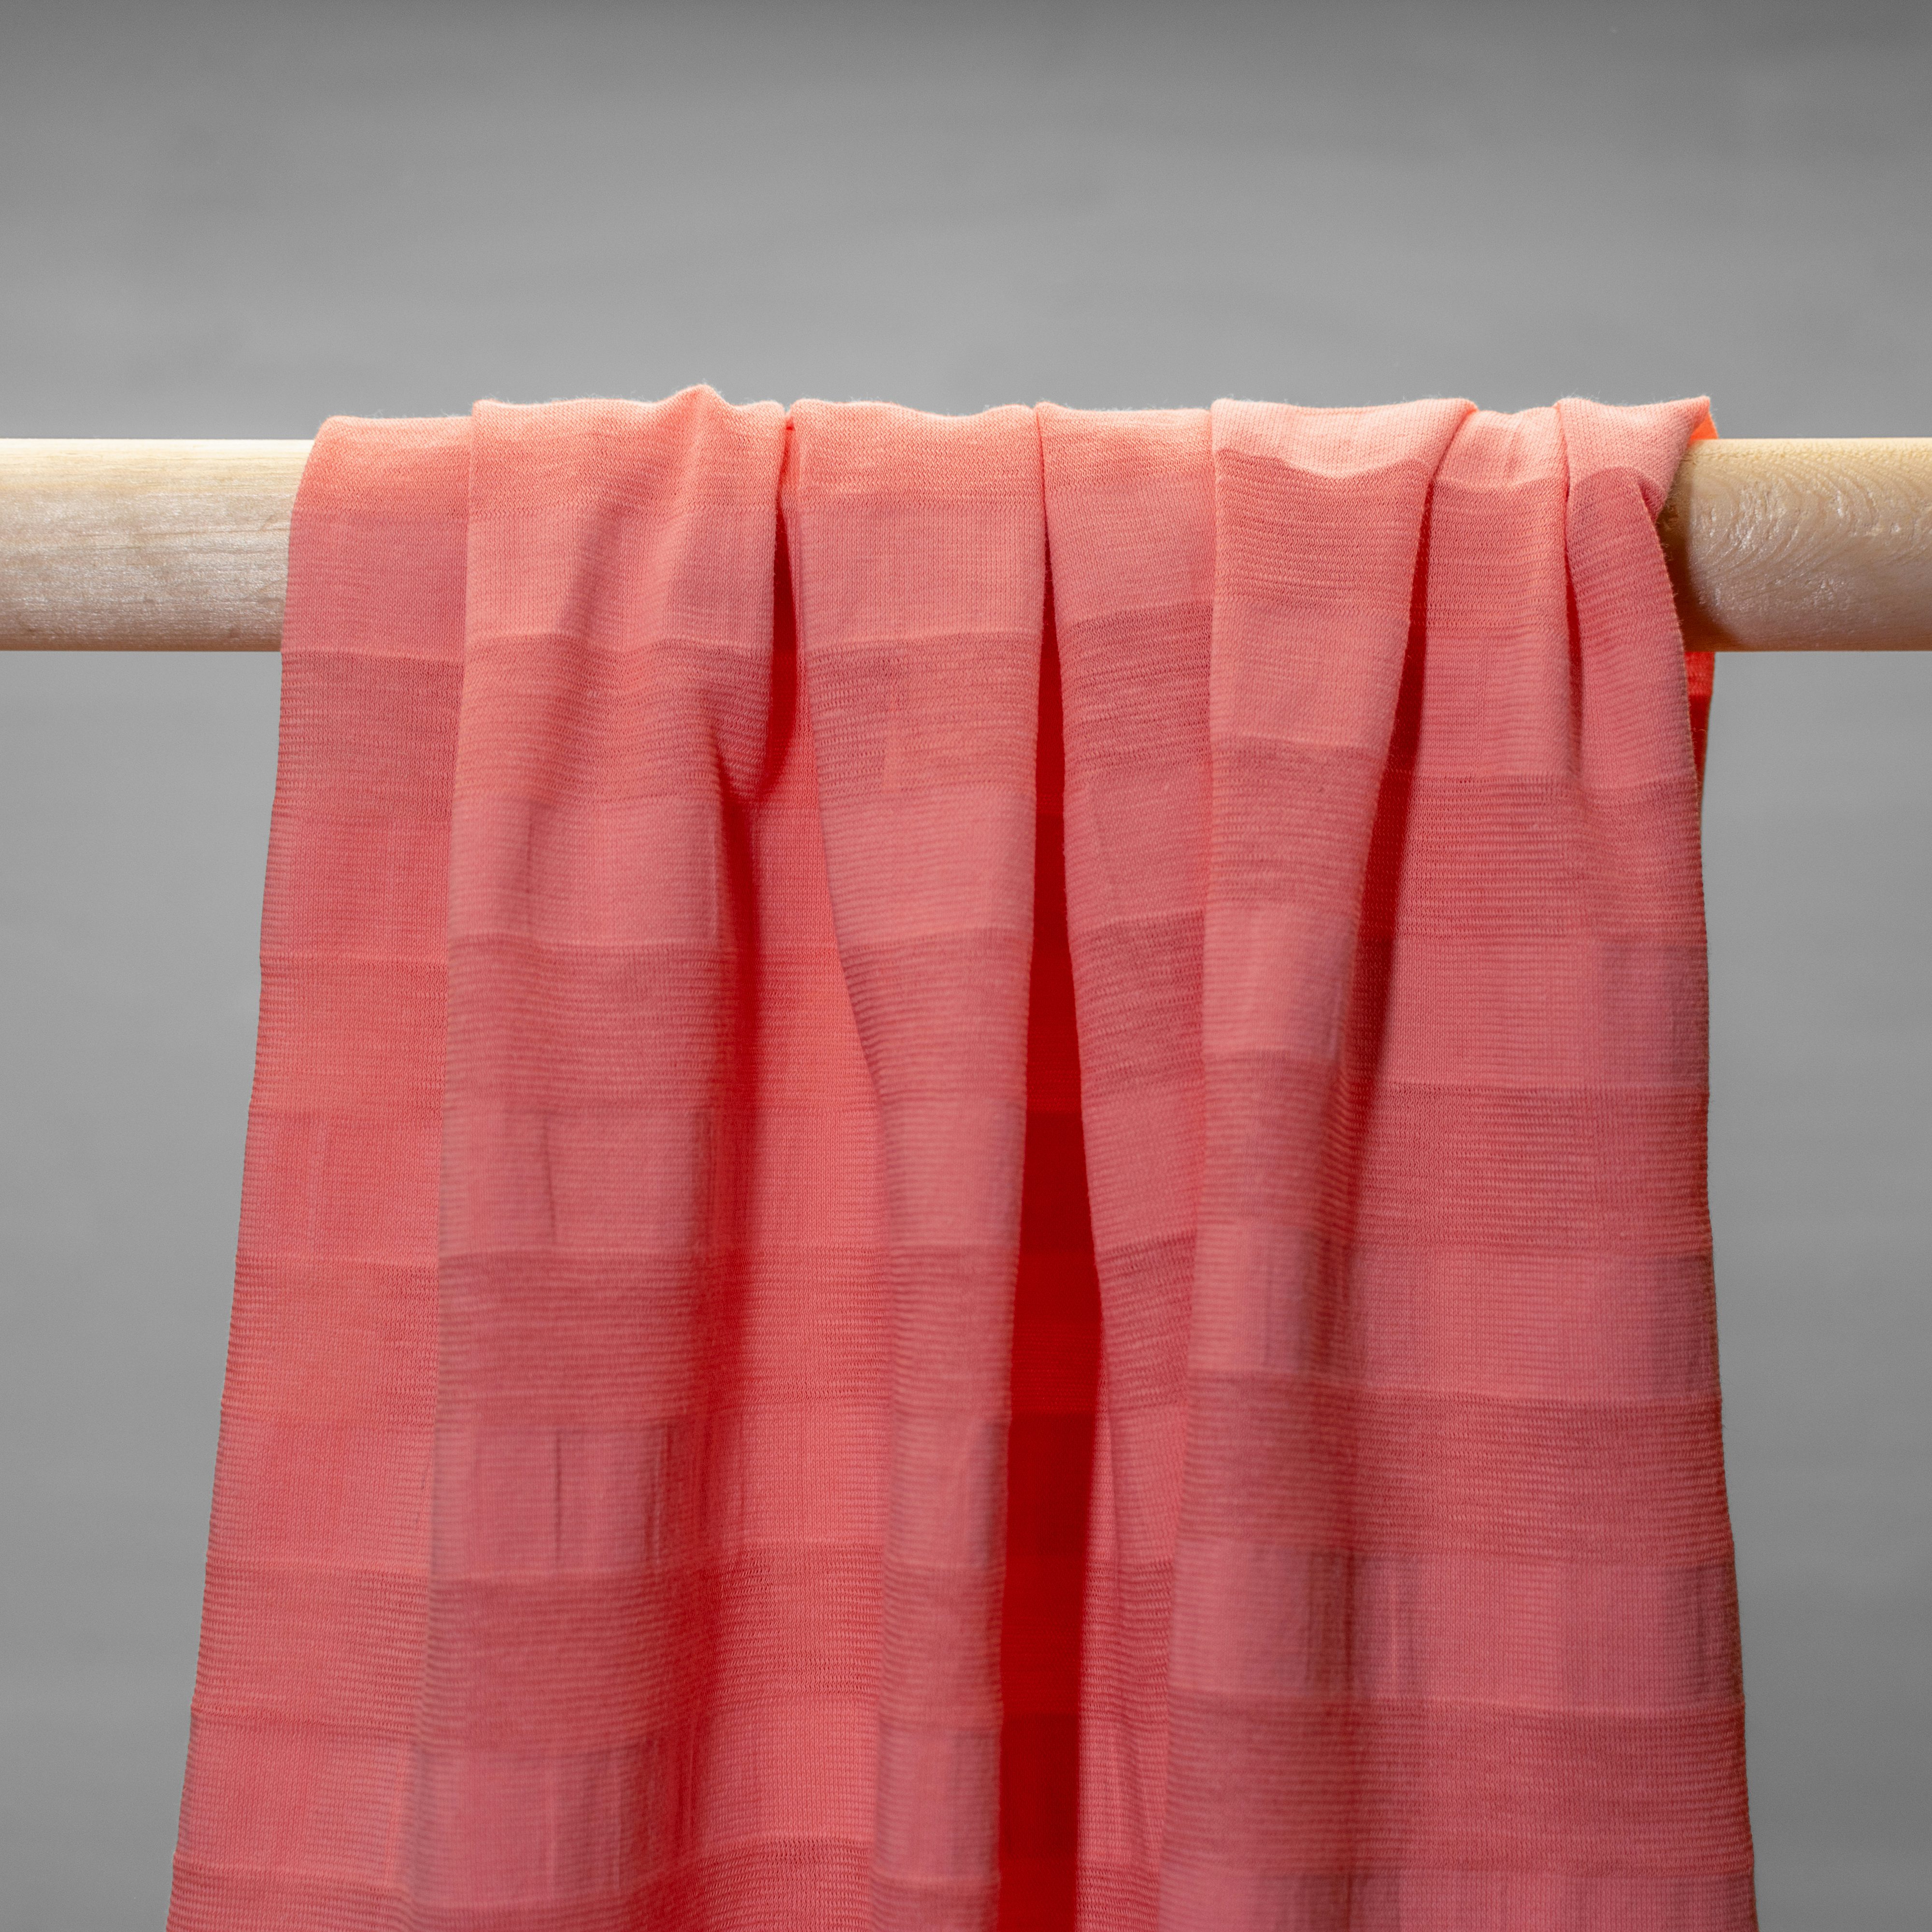 Pink striped  jersey hanging in folds.